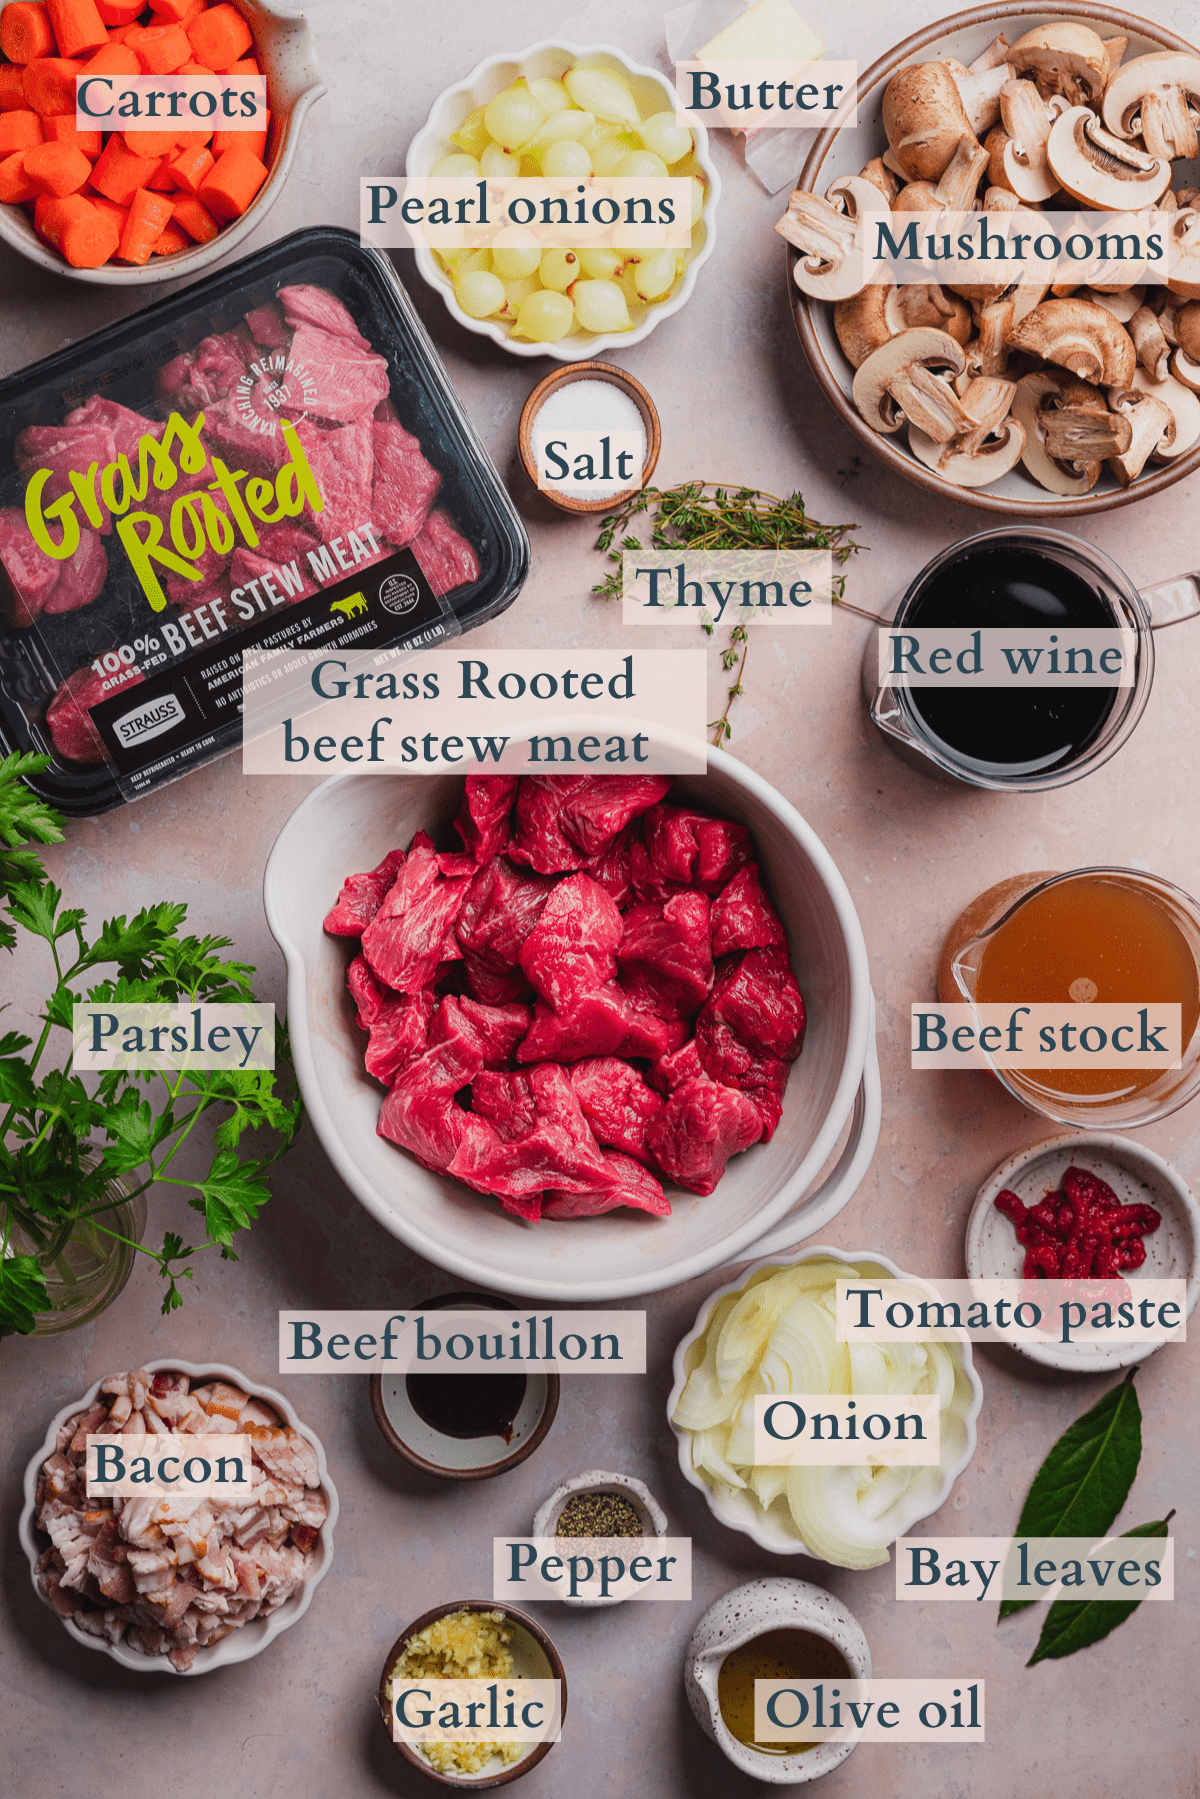 beef bourguignon recipe ingredients including carrots, pearl onions, onions, mushrooms, garlic, thyme, parsley, salt, pepper, beef stock, red wine, beef bouillon, butter, olive oil, beef stew meat, tomato paste, bay leaves, and bacon with text to denote each ingredient.  